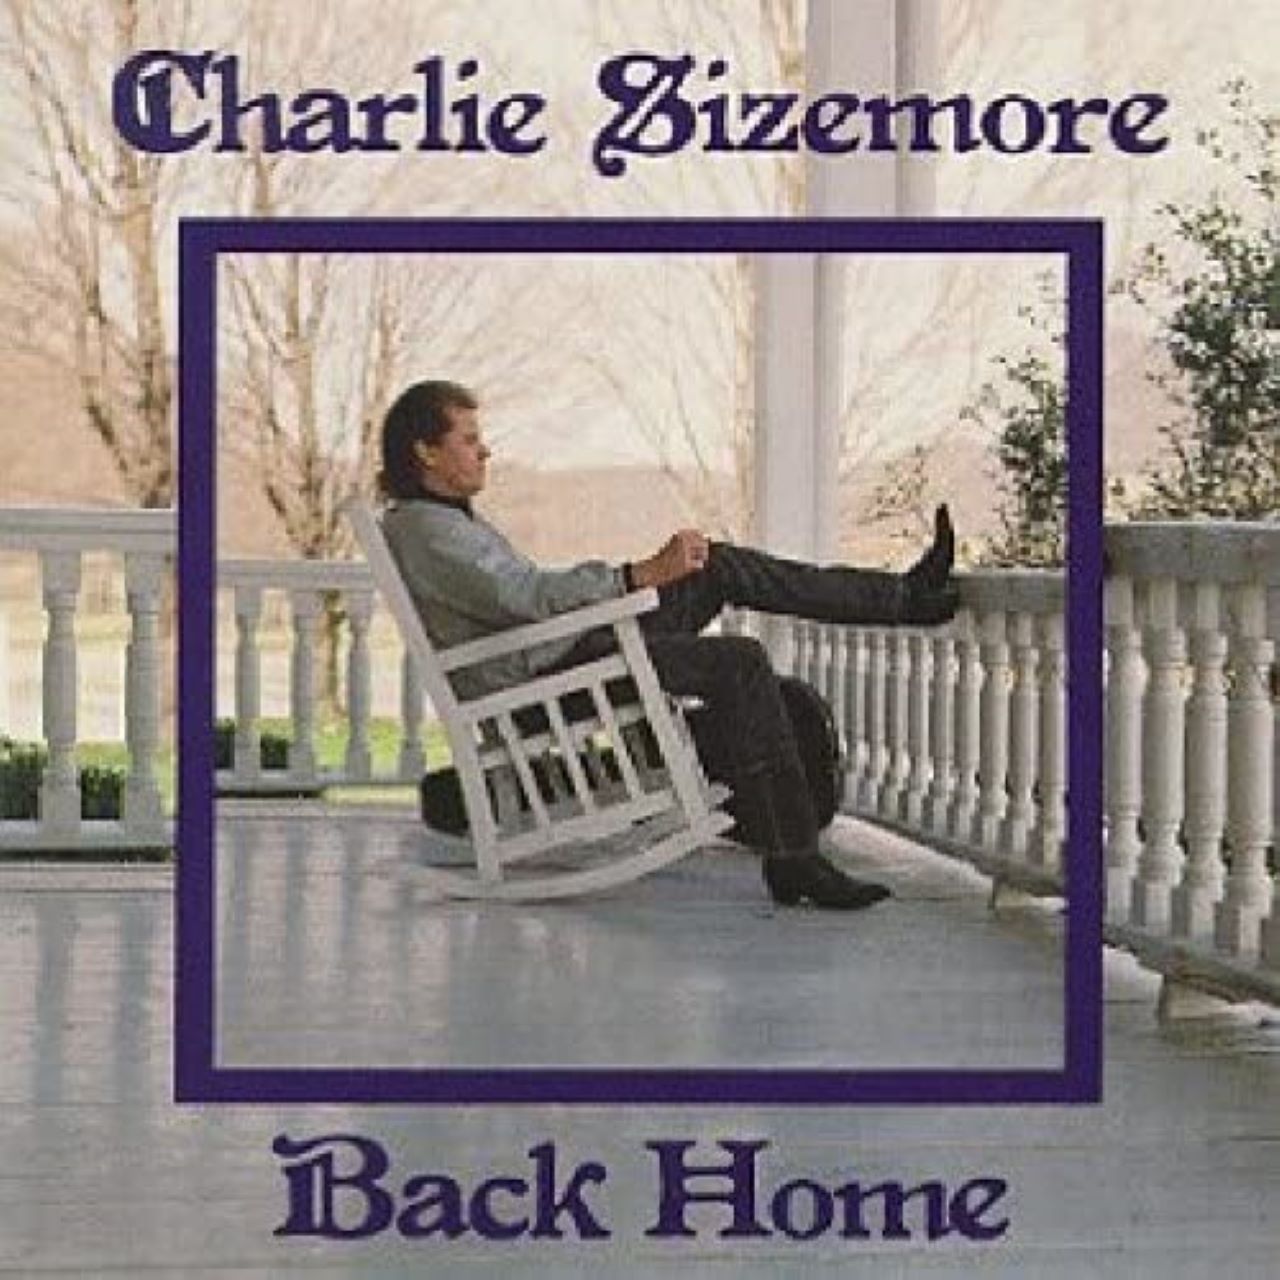 Charlie Sizemore - Back Home cover album